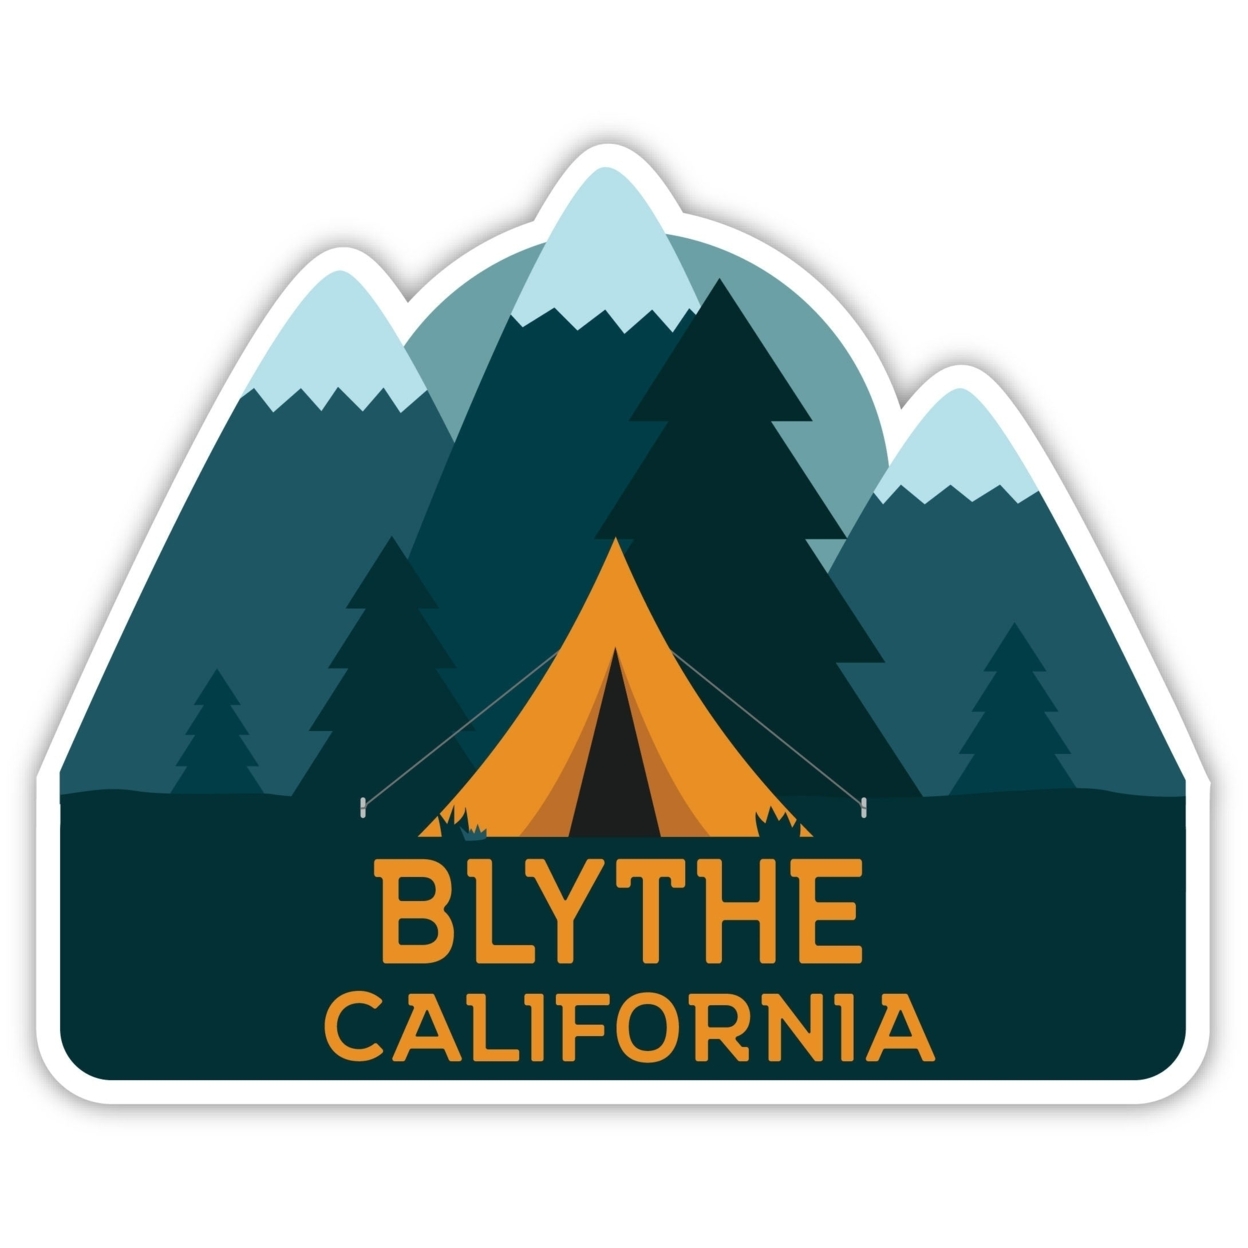 Blythe California Souvenir Decorative Stickers (Choose Theme And Size) - 4-Pack, 2-Inch, Tent